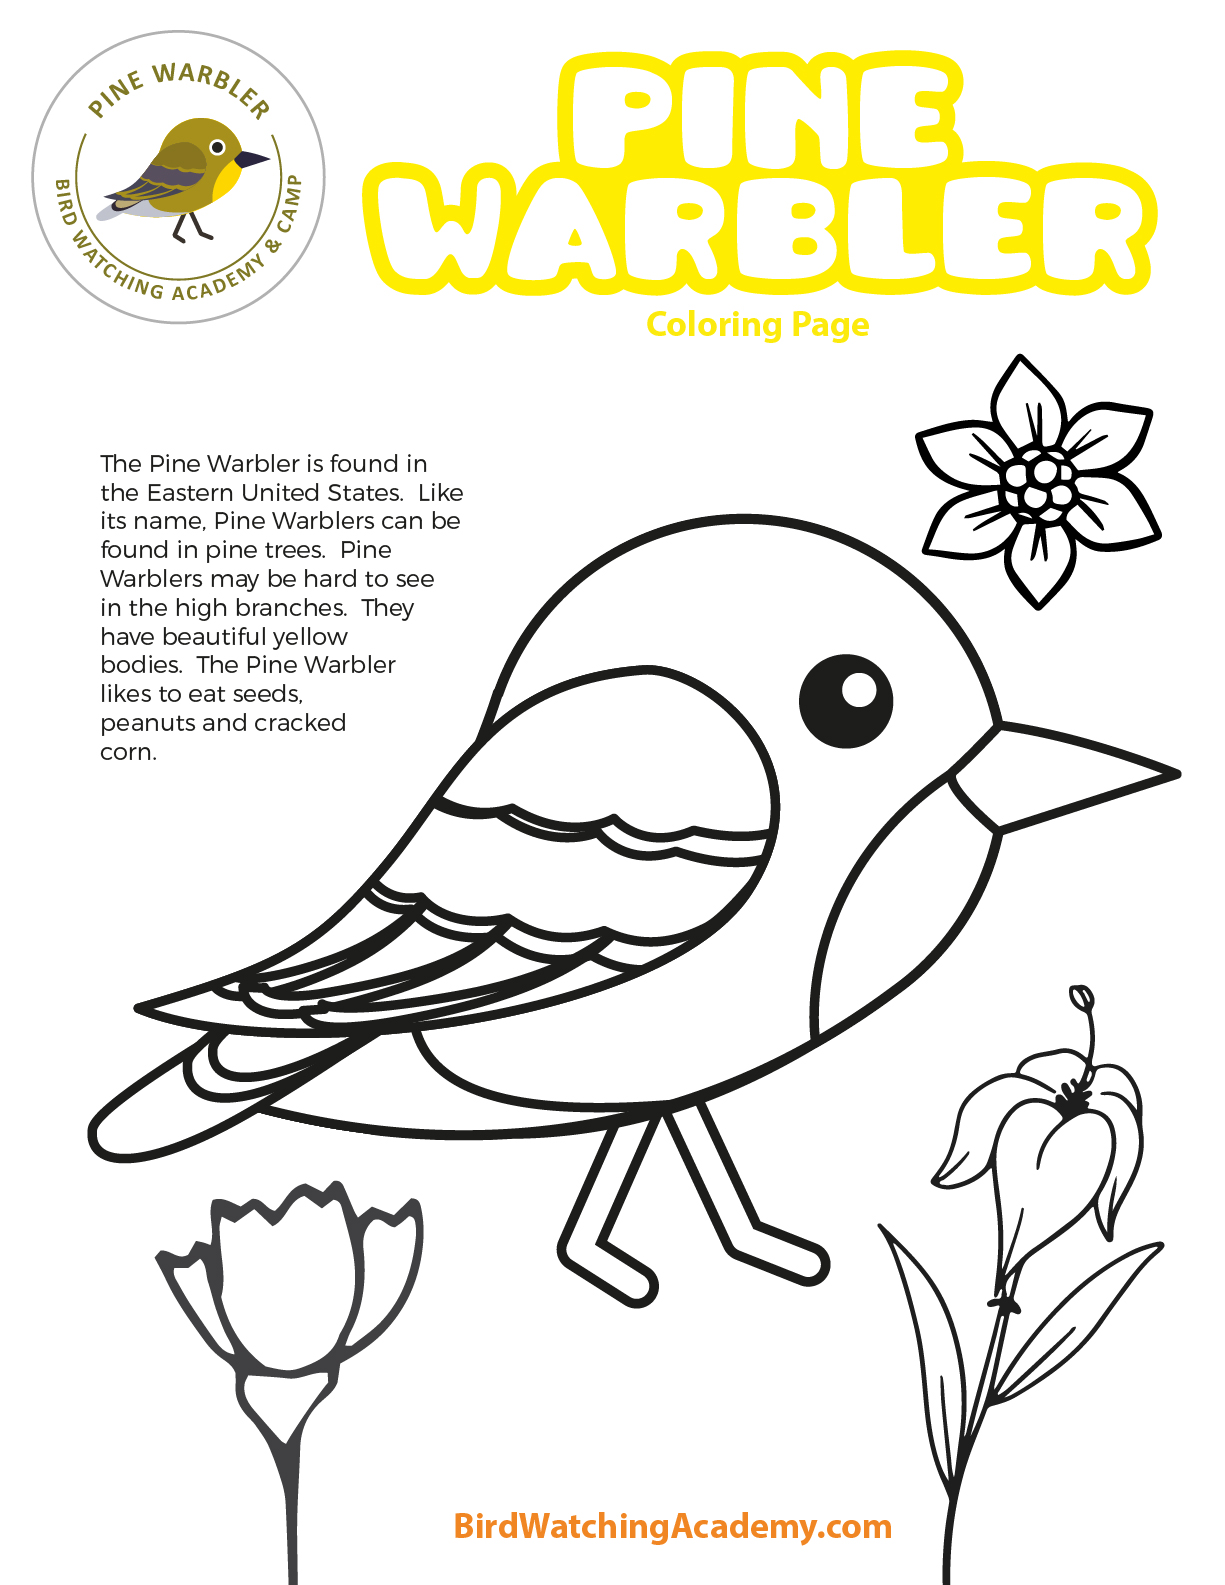 Pine Warbler Coloring Page - Bird Watching Academy